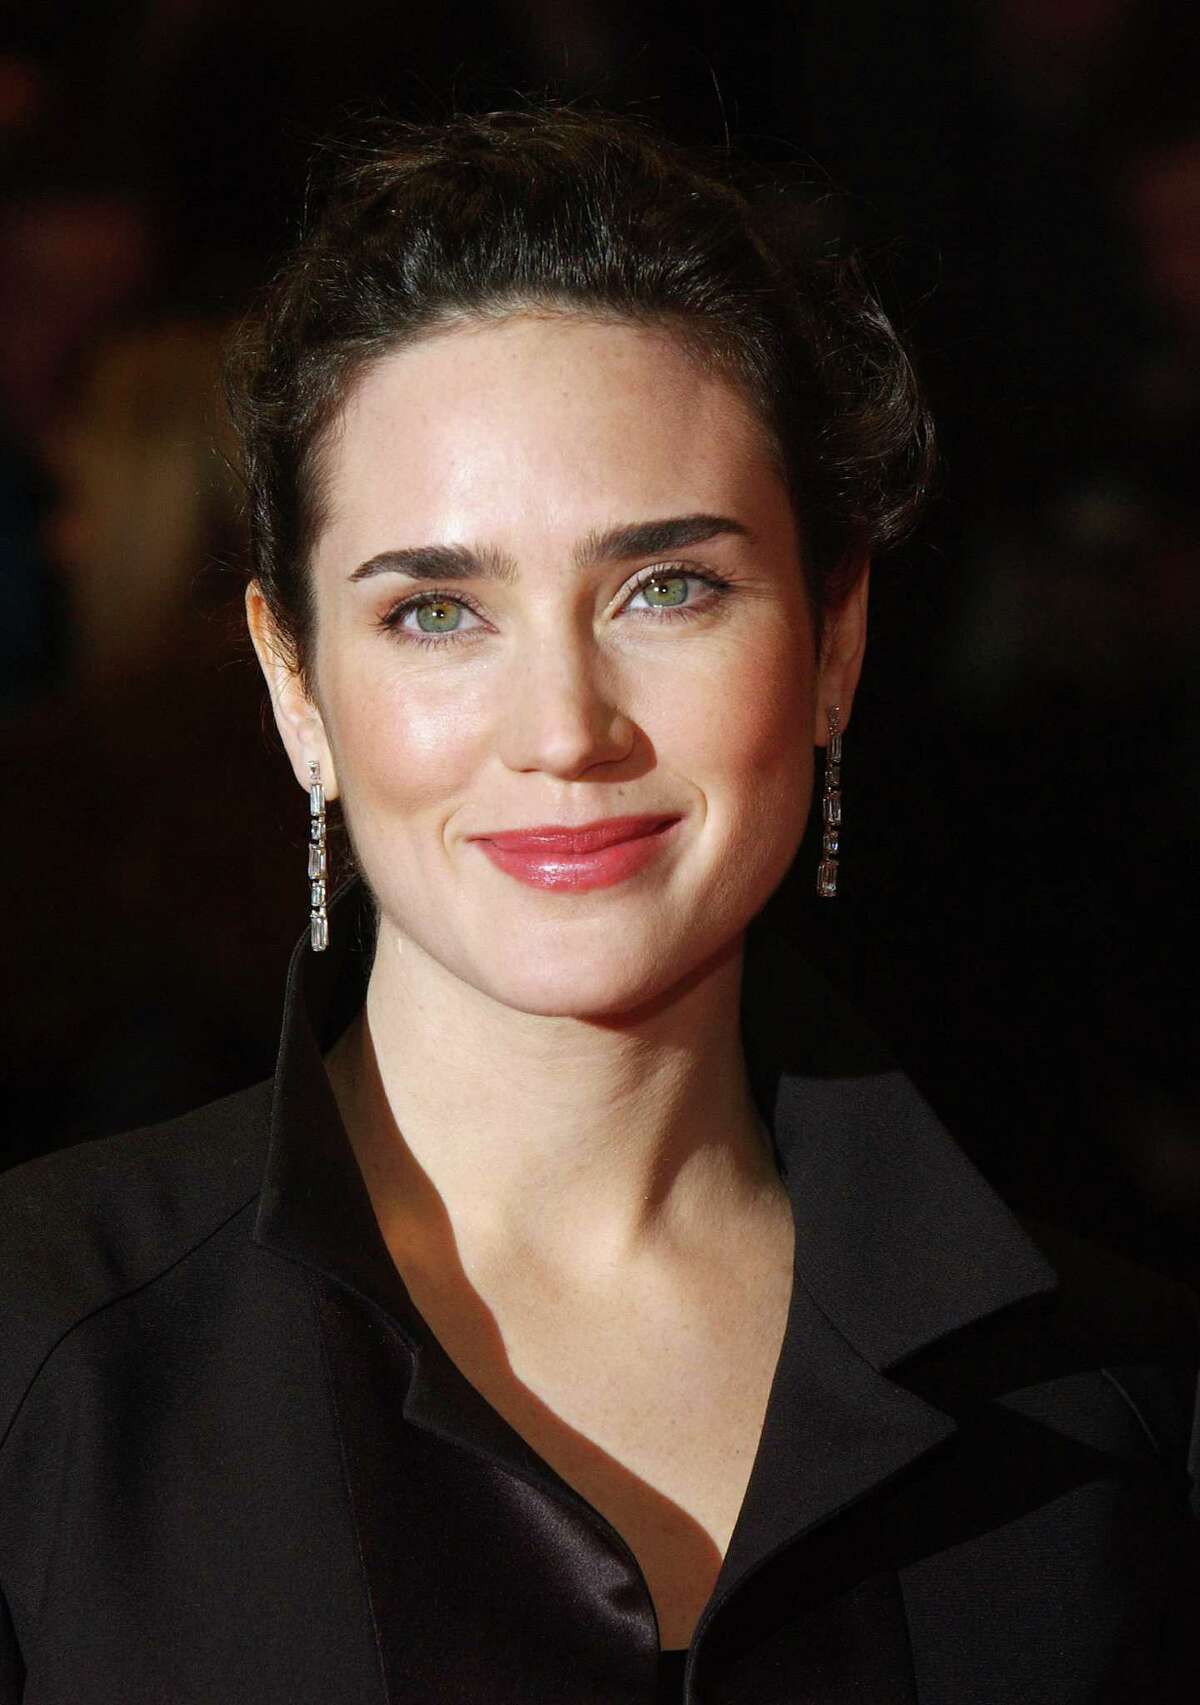 Born Dec. 12, 1970 in upstate New York, Oscar winner Jennifer Connelly has proven herself one of America's finest dramatic actresses. She is the proud possessor of an Oscar for her supporting role in "A Beautiful Mind," which premiered in 2001. This photo: Feb. 23, 2003, at the British Academy Film Awards in London.